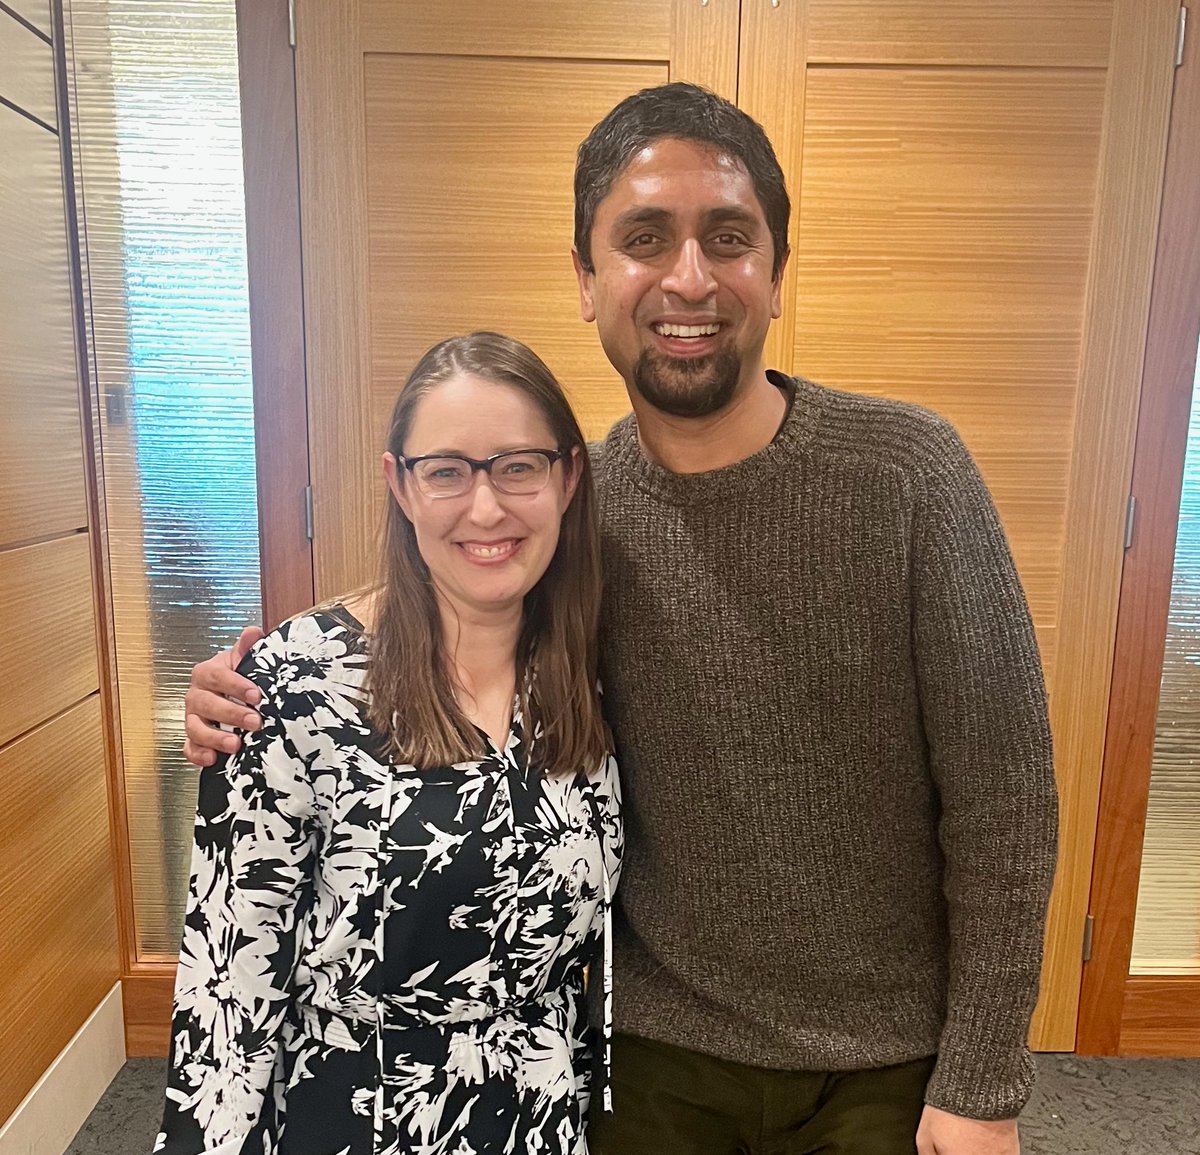 Yesterday was a special day as I returned to @DanaFarber to give a talk on our work at @Reboot_Rx. It was great to reconnect with past colleagues and wonderful to see Pradeep Mangalath at the place where our journey building Reboot Rx began. #cancer #research #nonprofit